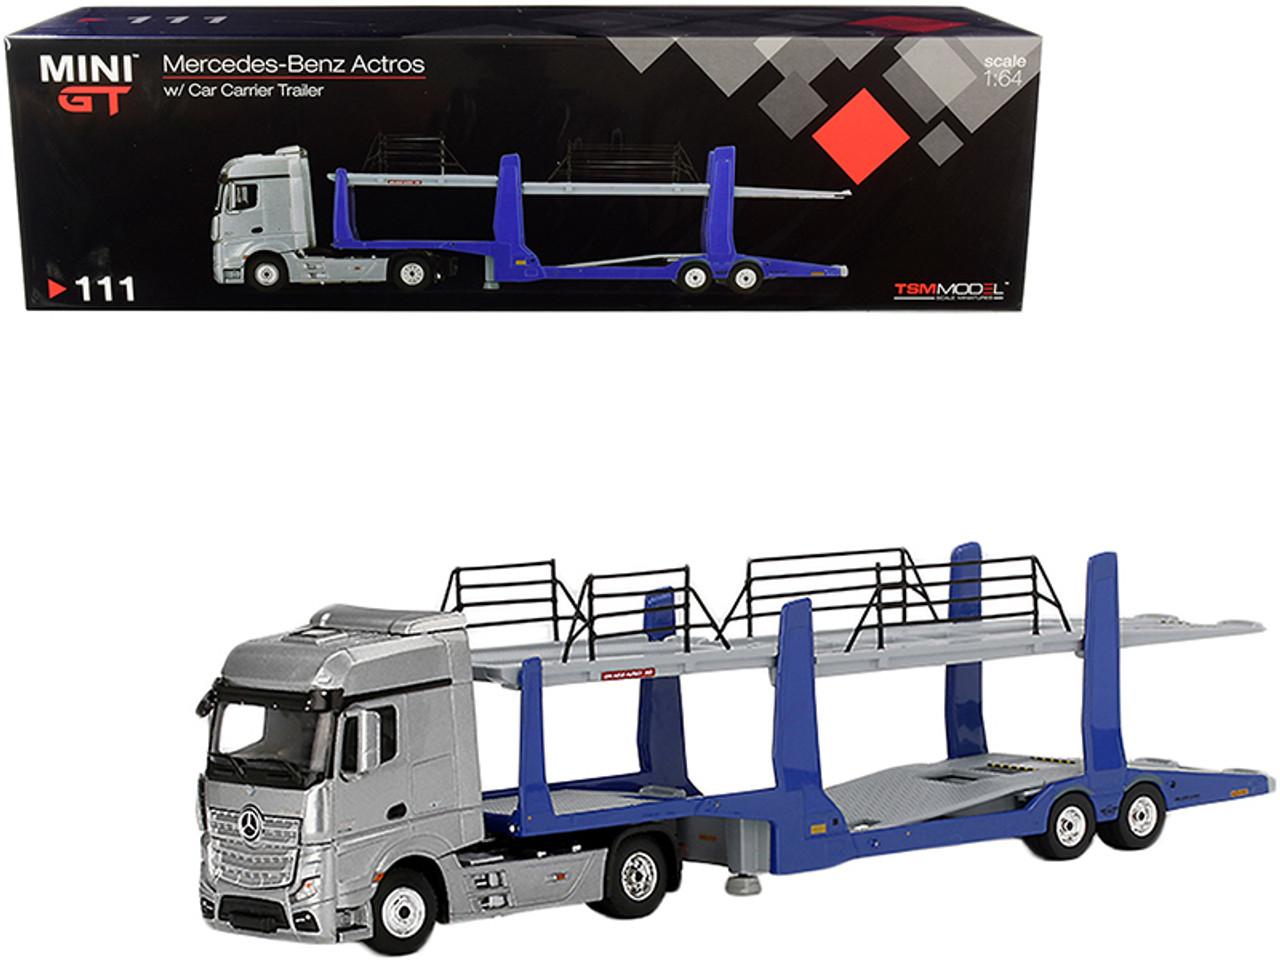 Mercedes Benz Actros Silver with Blue Car Carrier Trailer Car Transporter 1/64 Diecast Model by True Scale Miniatures